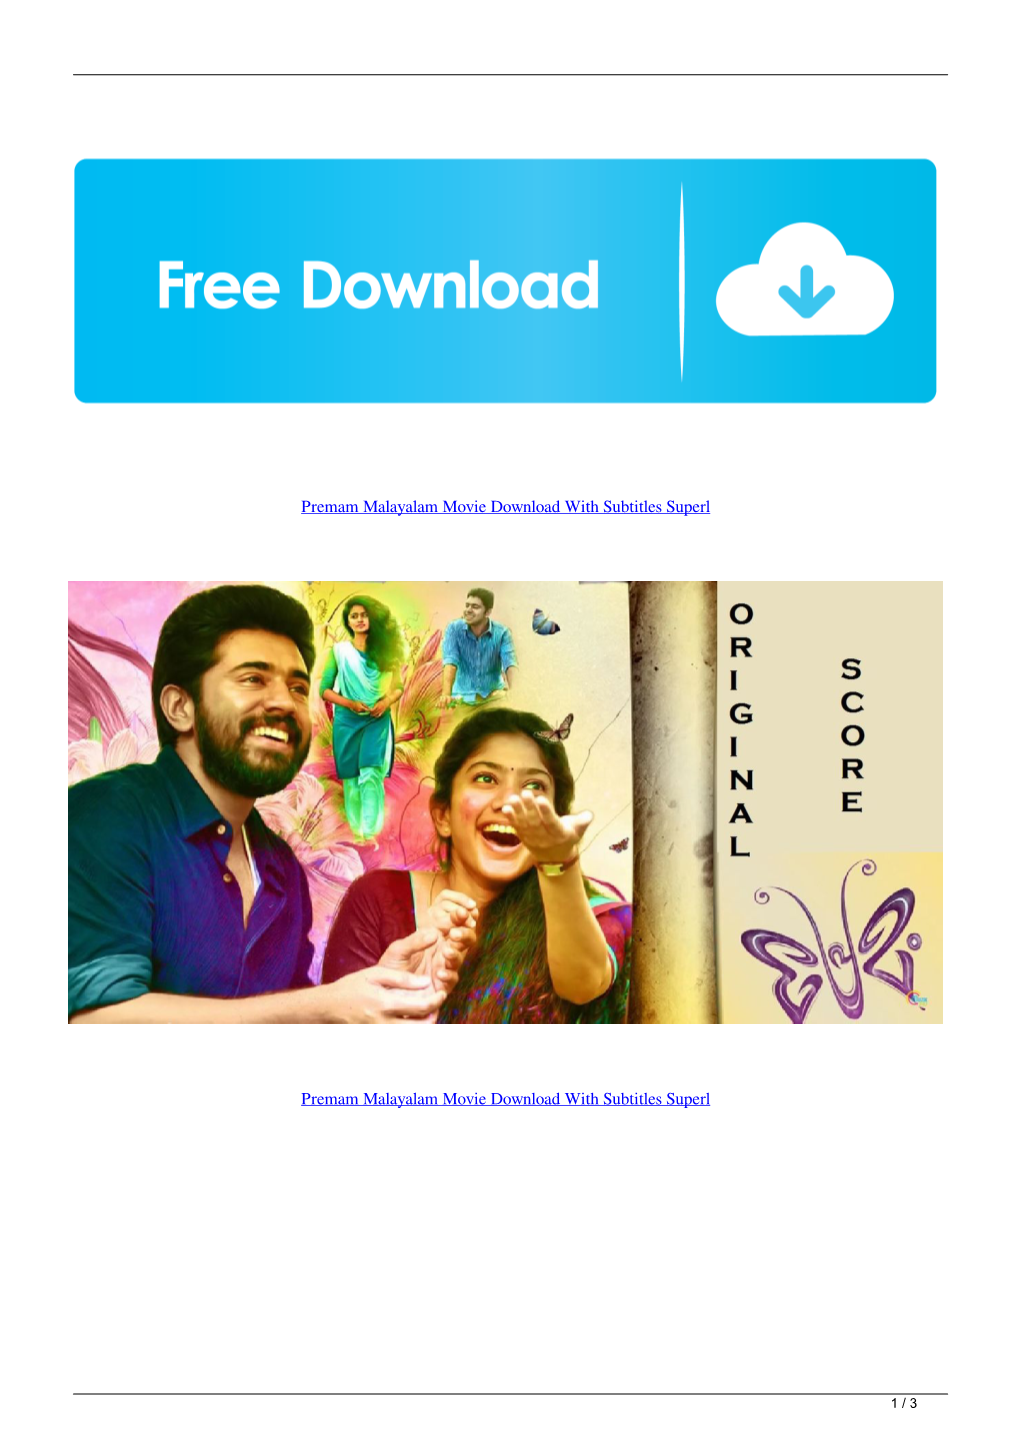 Premam Malayalam Movie Download with Subtitles Superl